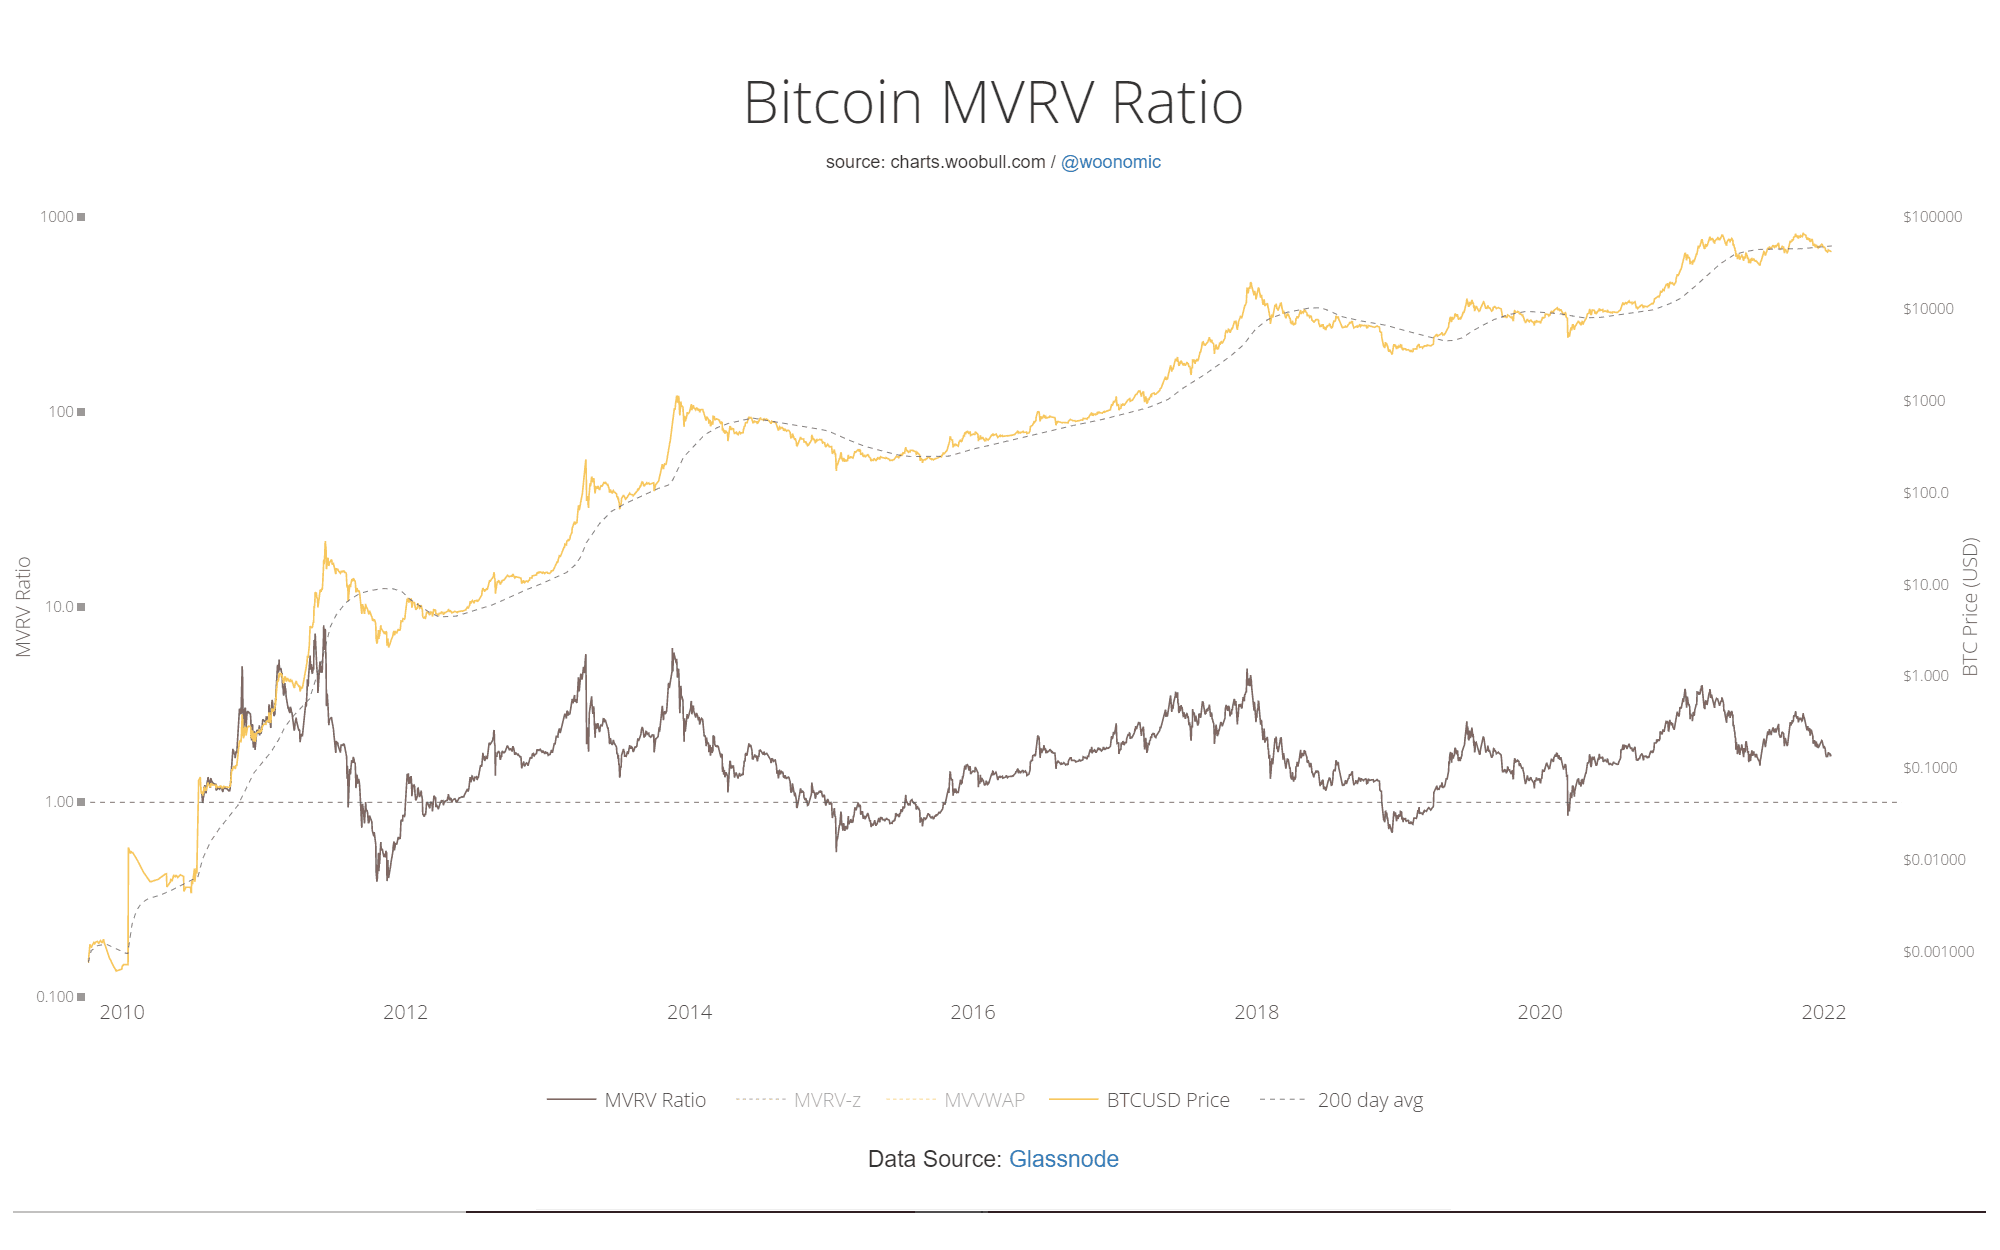 Bitcoin MVRV ratio not yet at strong-buy levels. Source: Woobull.com